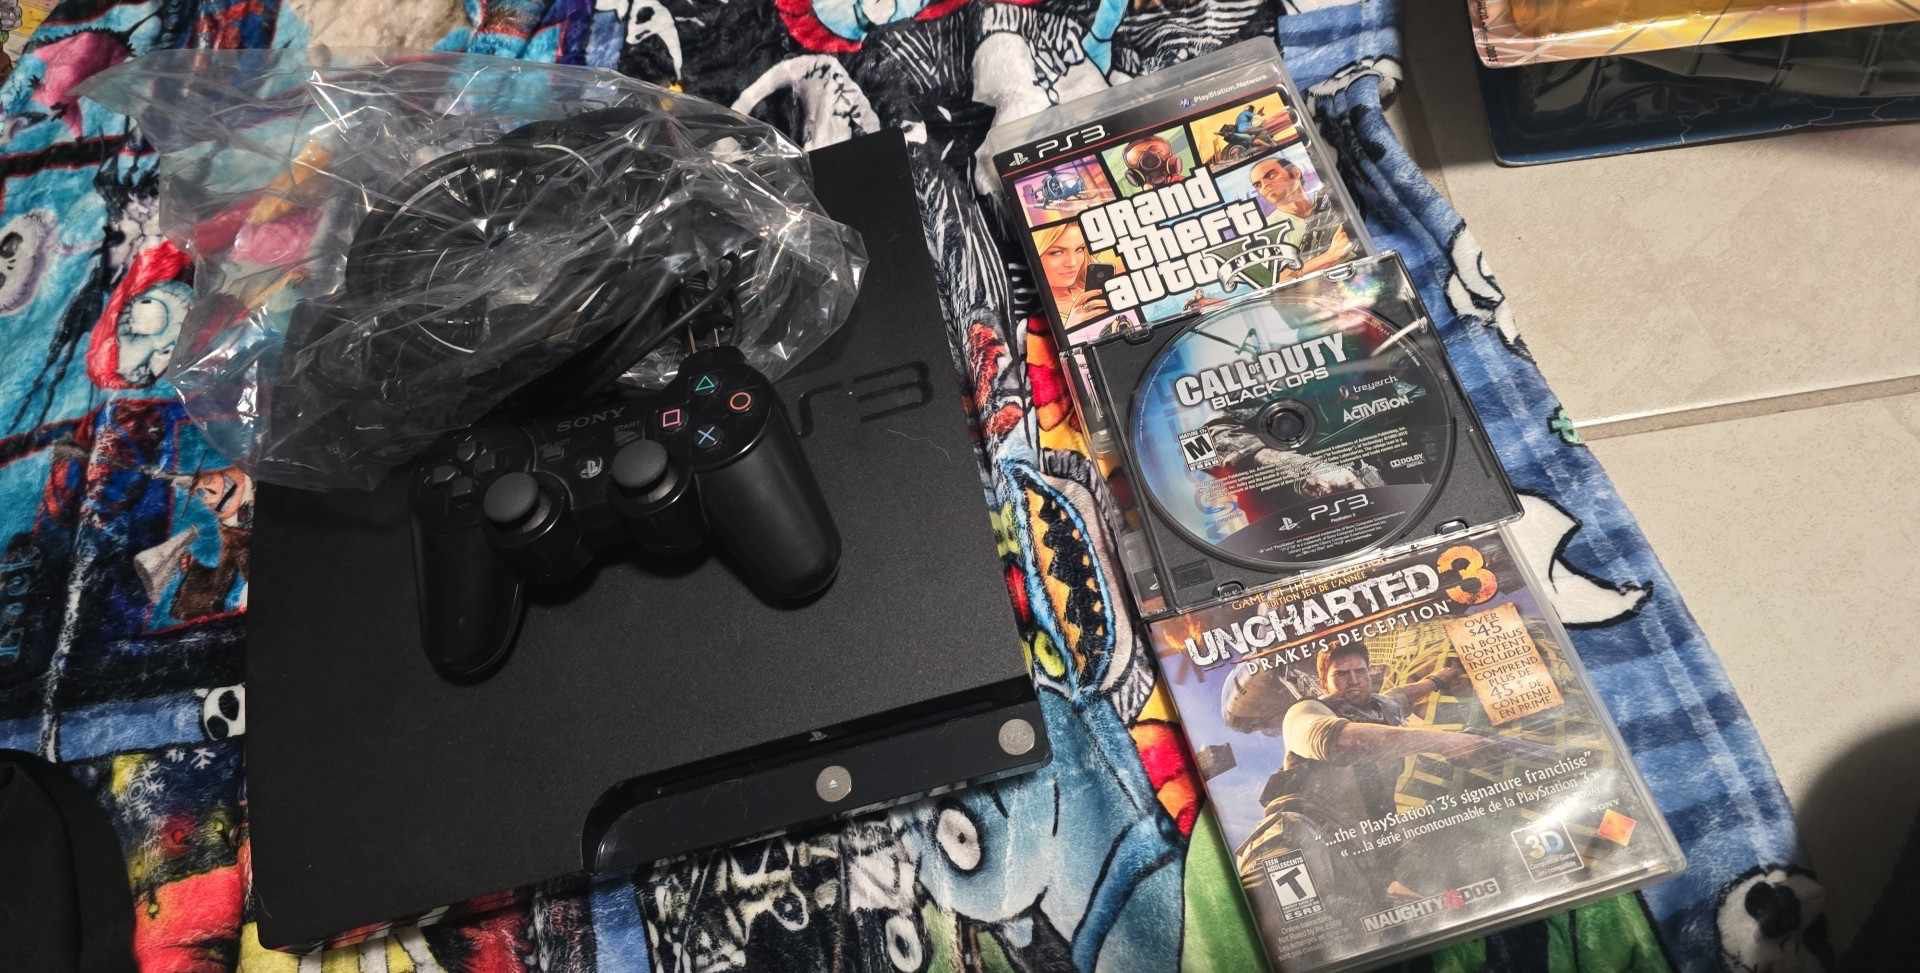 PS3 Slim And Game Bundle Mint 